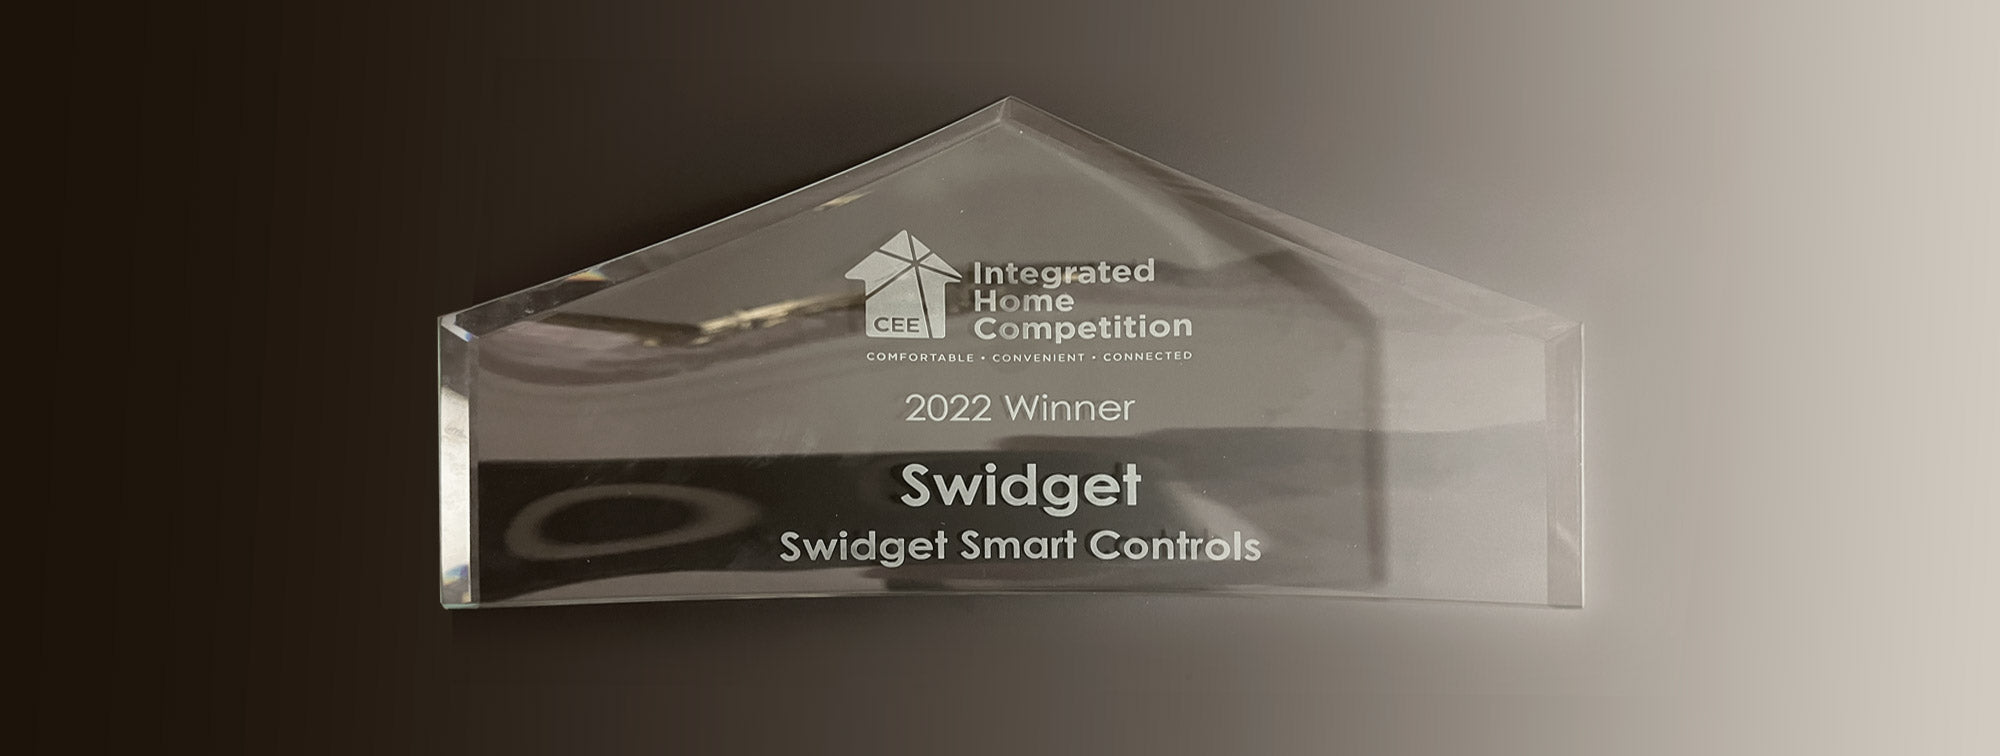 Swidget wins 2022 Integrated Home Competition award